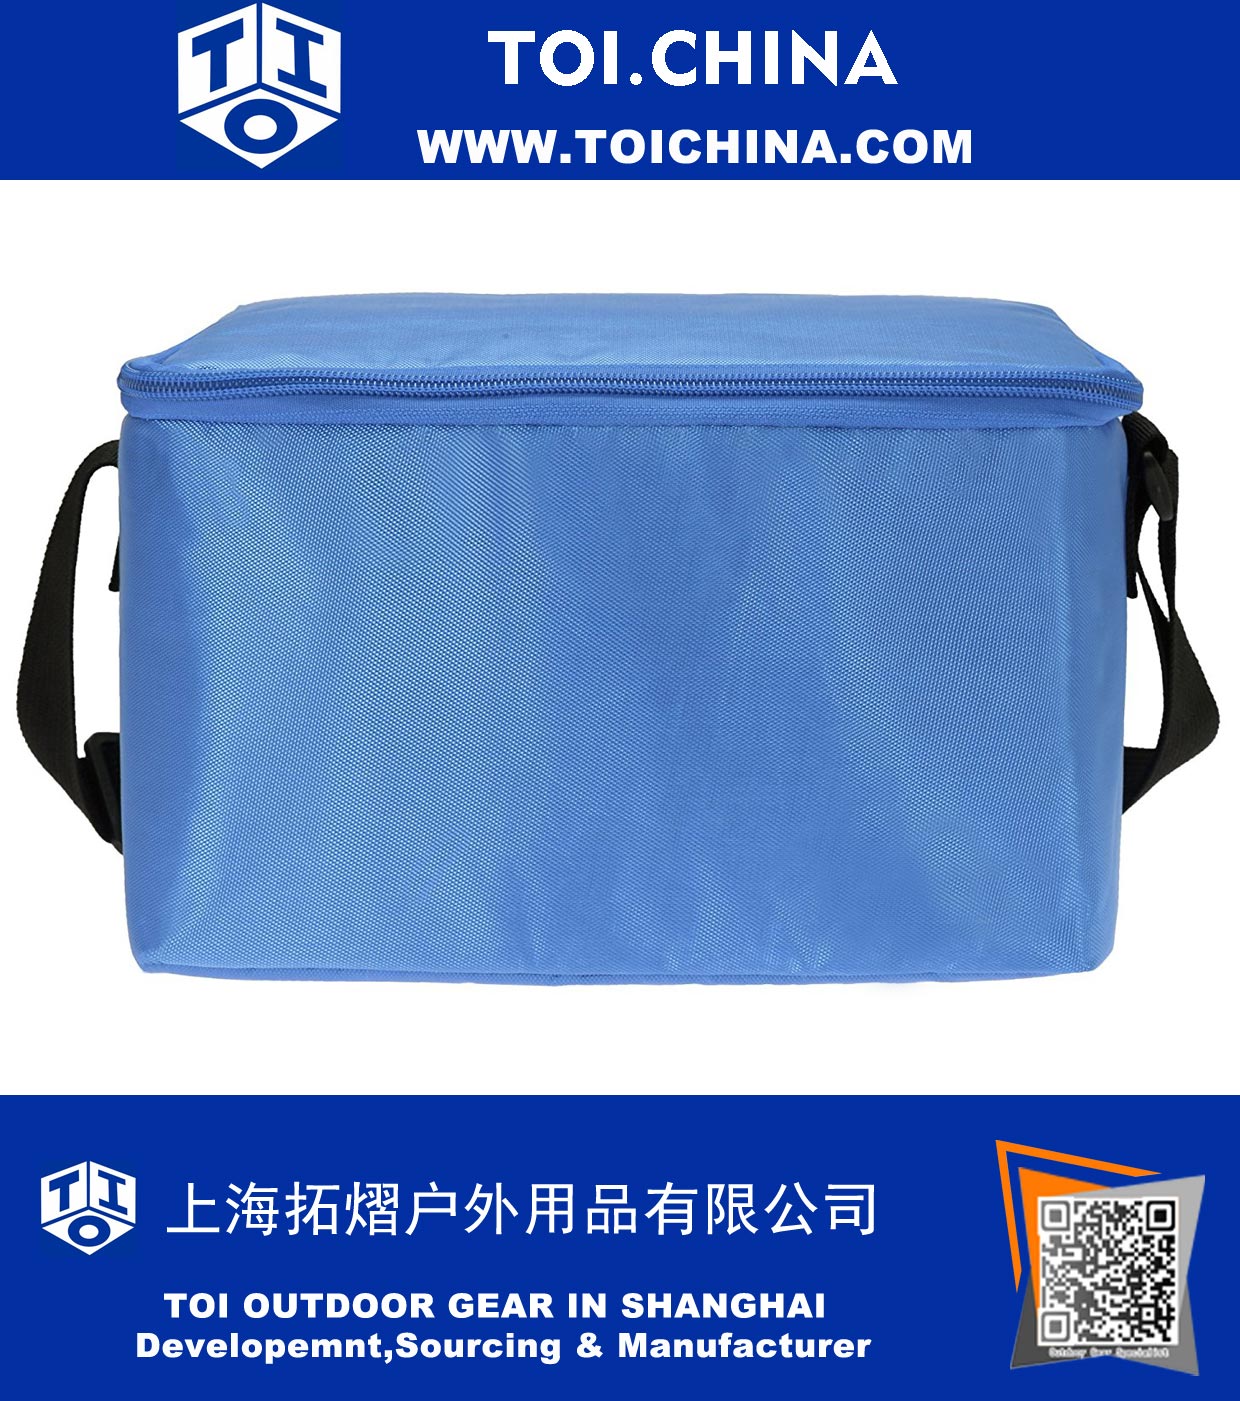 Insulated Lunch Box Cooler Bag Lock in Heat and Cold, Picnic Bag for Outdoor, Sports, Beach, Hiking and Camping, Lake Blue